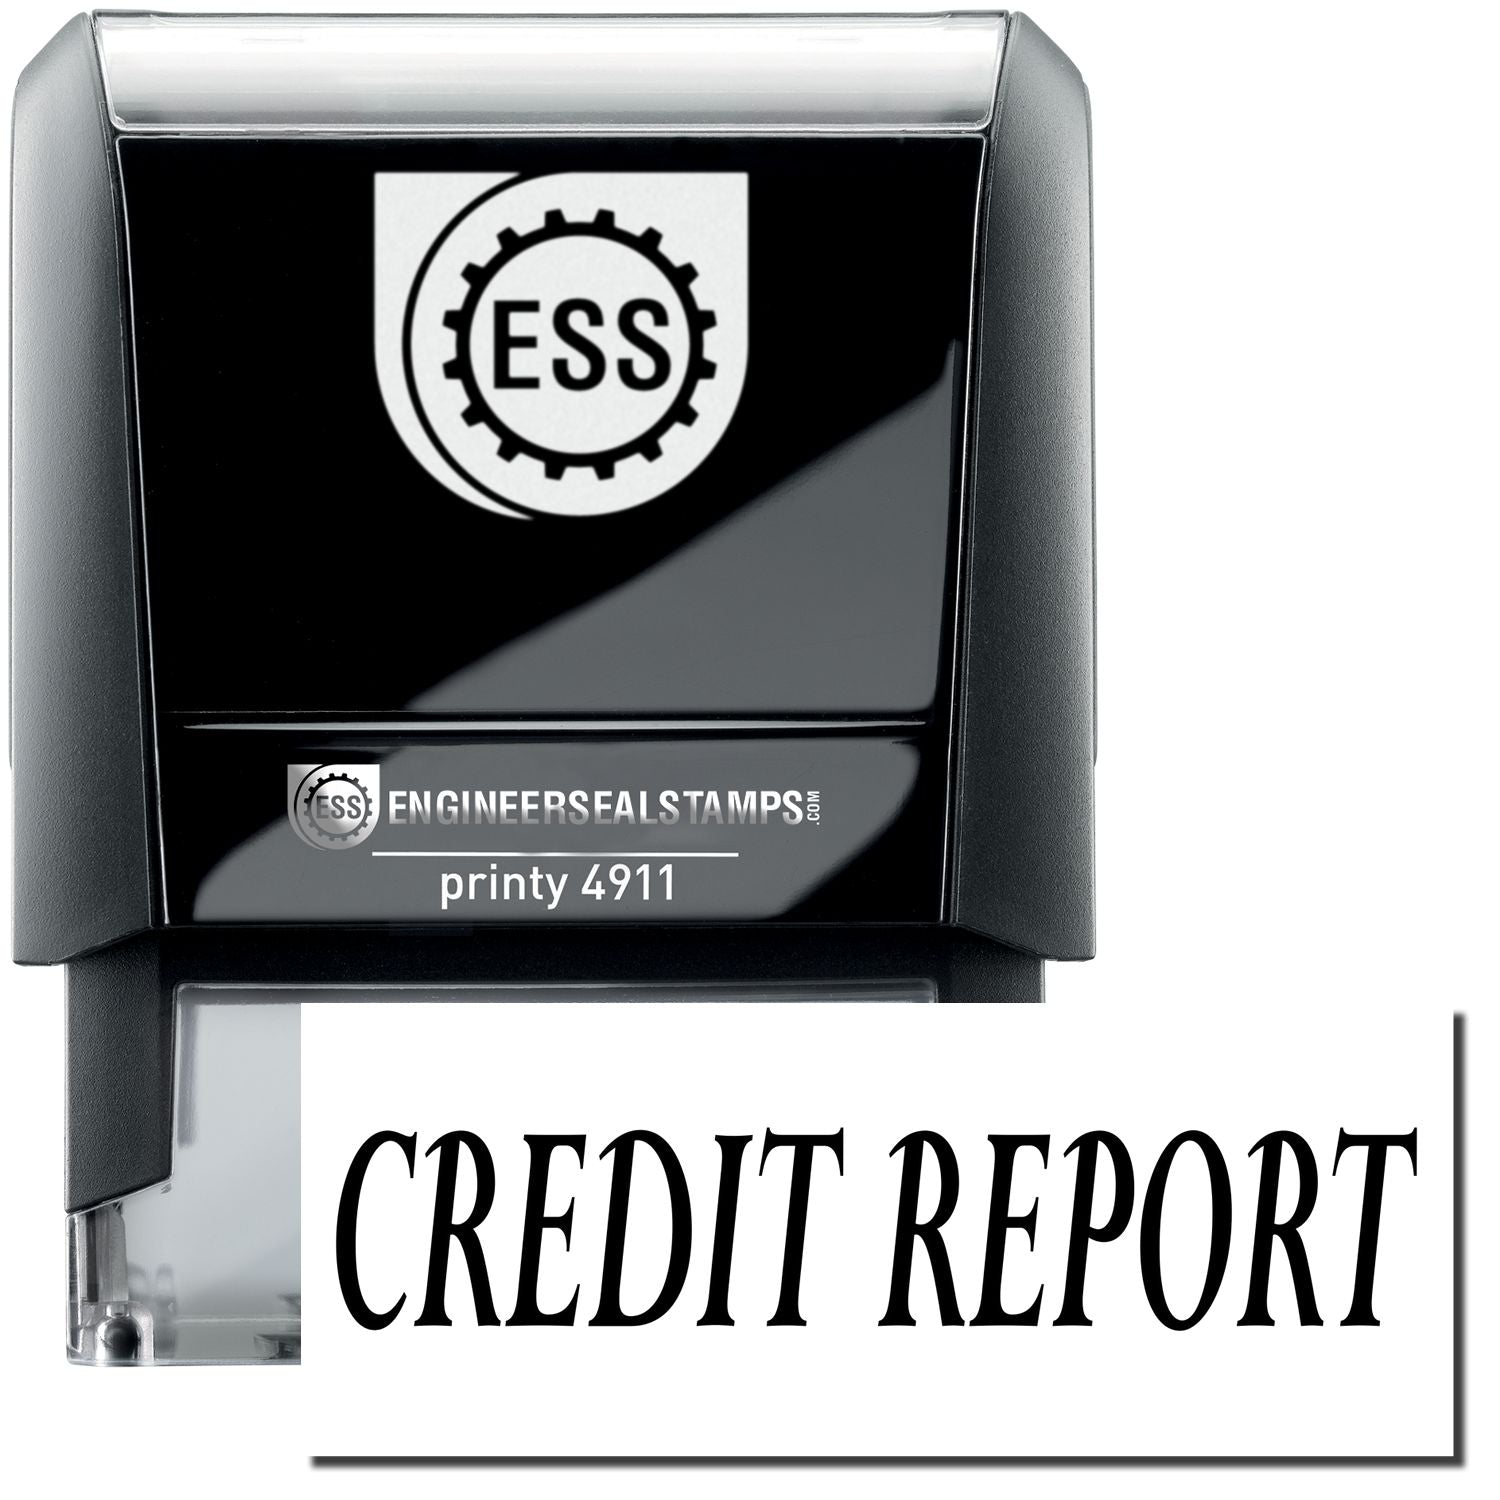 A self-inking stamp with a stamped image showing how the text "CREDIT REPORT" is displayed after stamping.